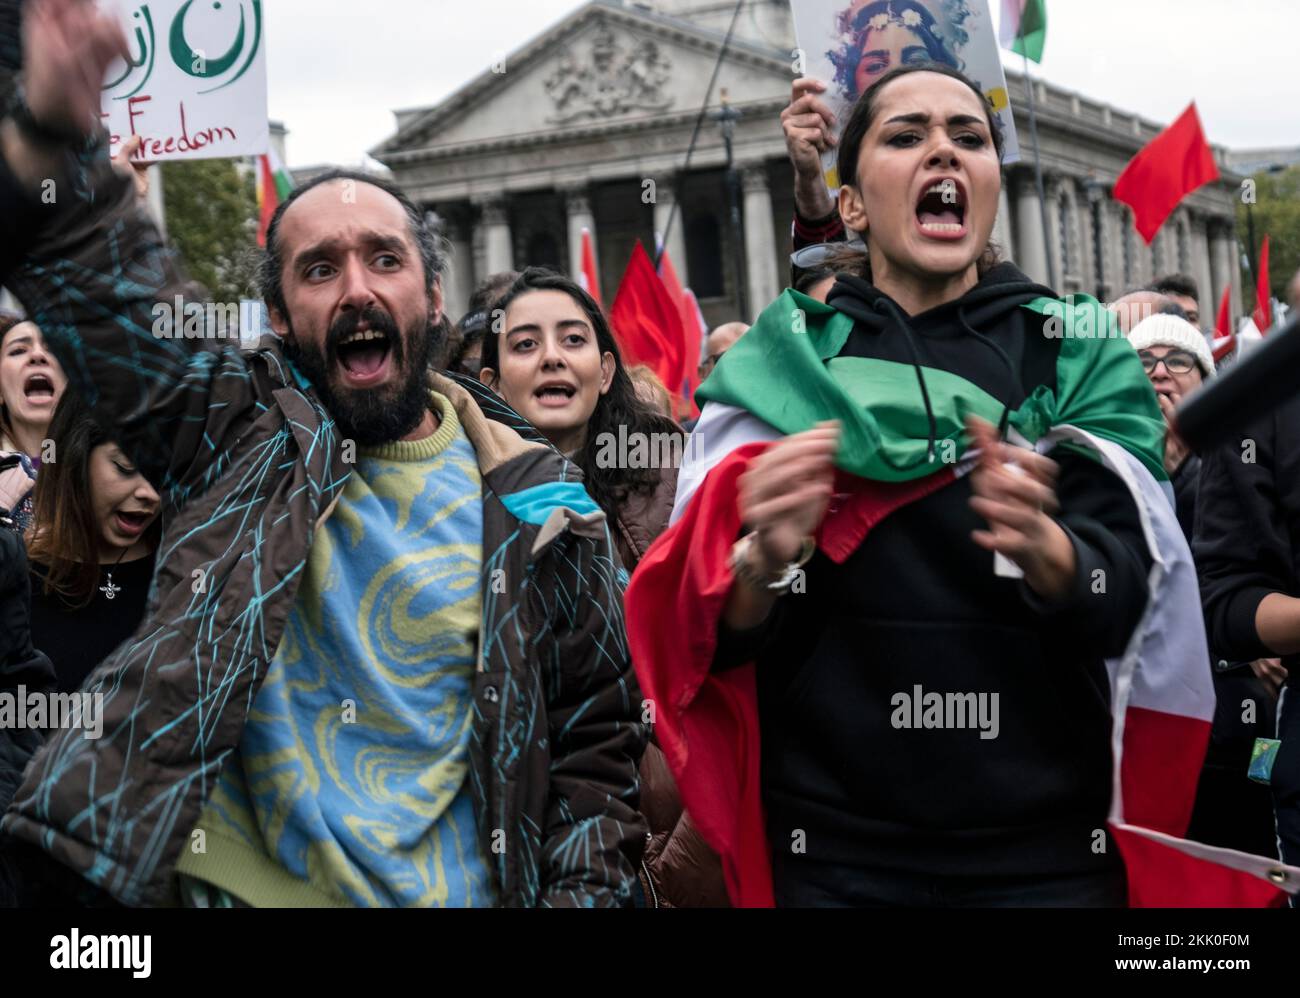 Iranians living in England protesting against the Islamic Republic in Iran. They are support ing the Womens uprising against repressive rule on wearing the hijab following death of Mahsa Amini. London November 2022 Stock Photo